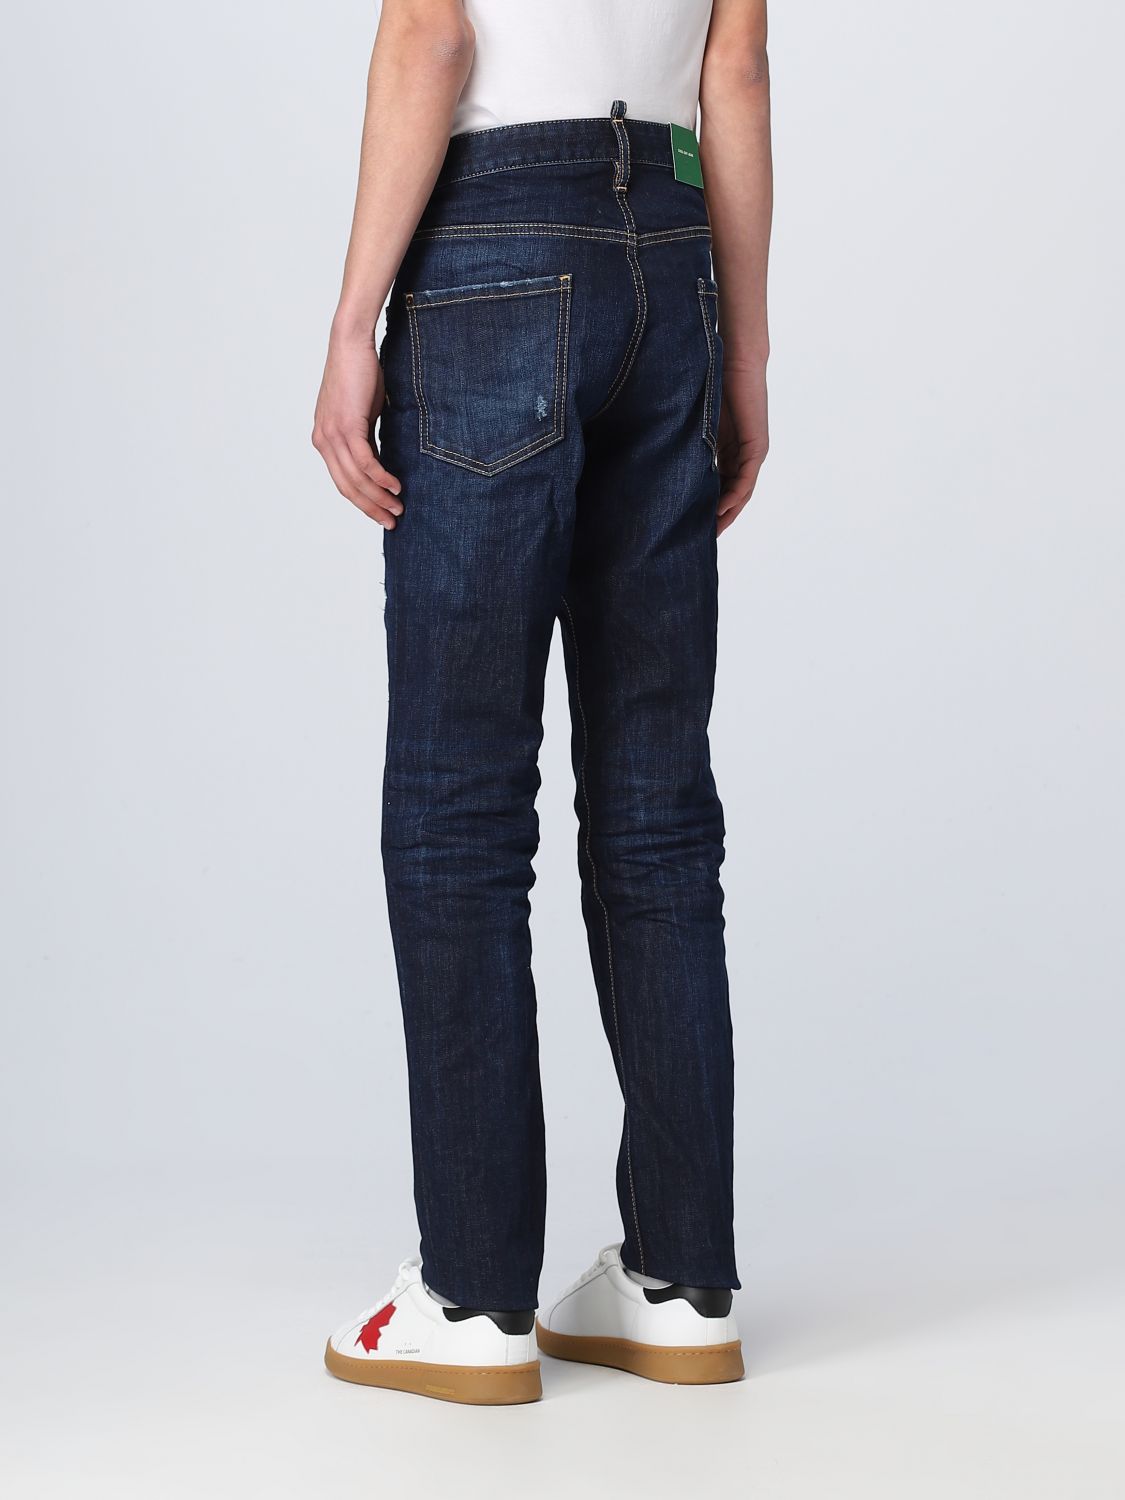 Jeans Dsquared2: Jeans Dsquared2 in denim blue navy 3